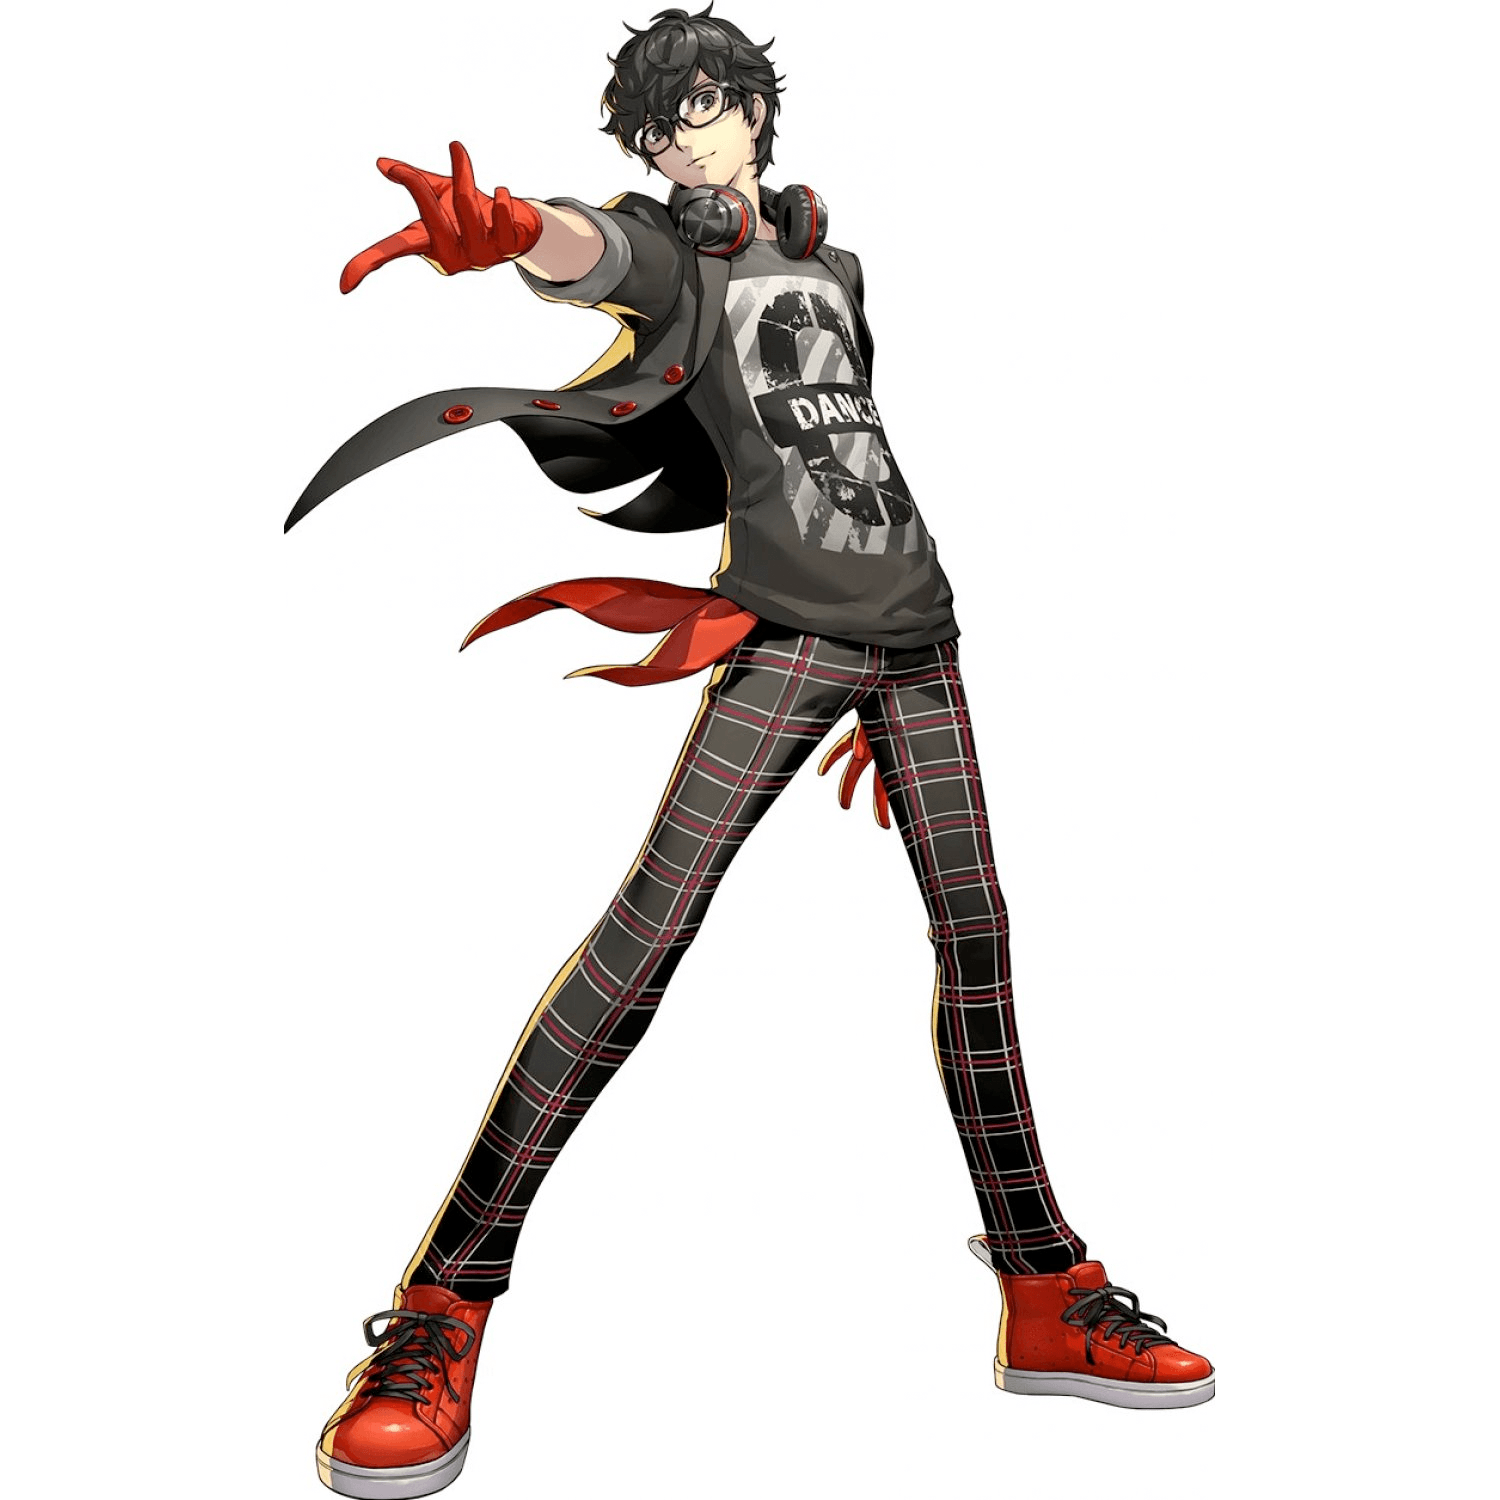 Persona 5: Dancing in Starlight screenshots, image and picture